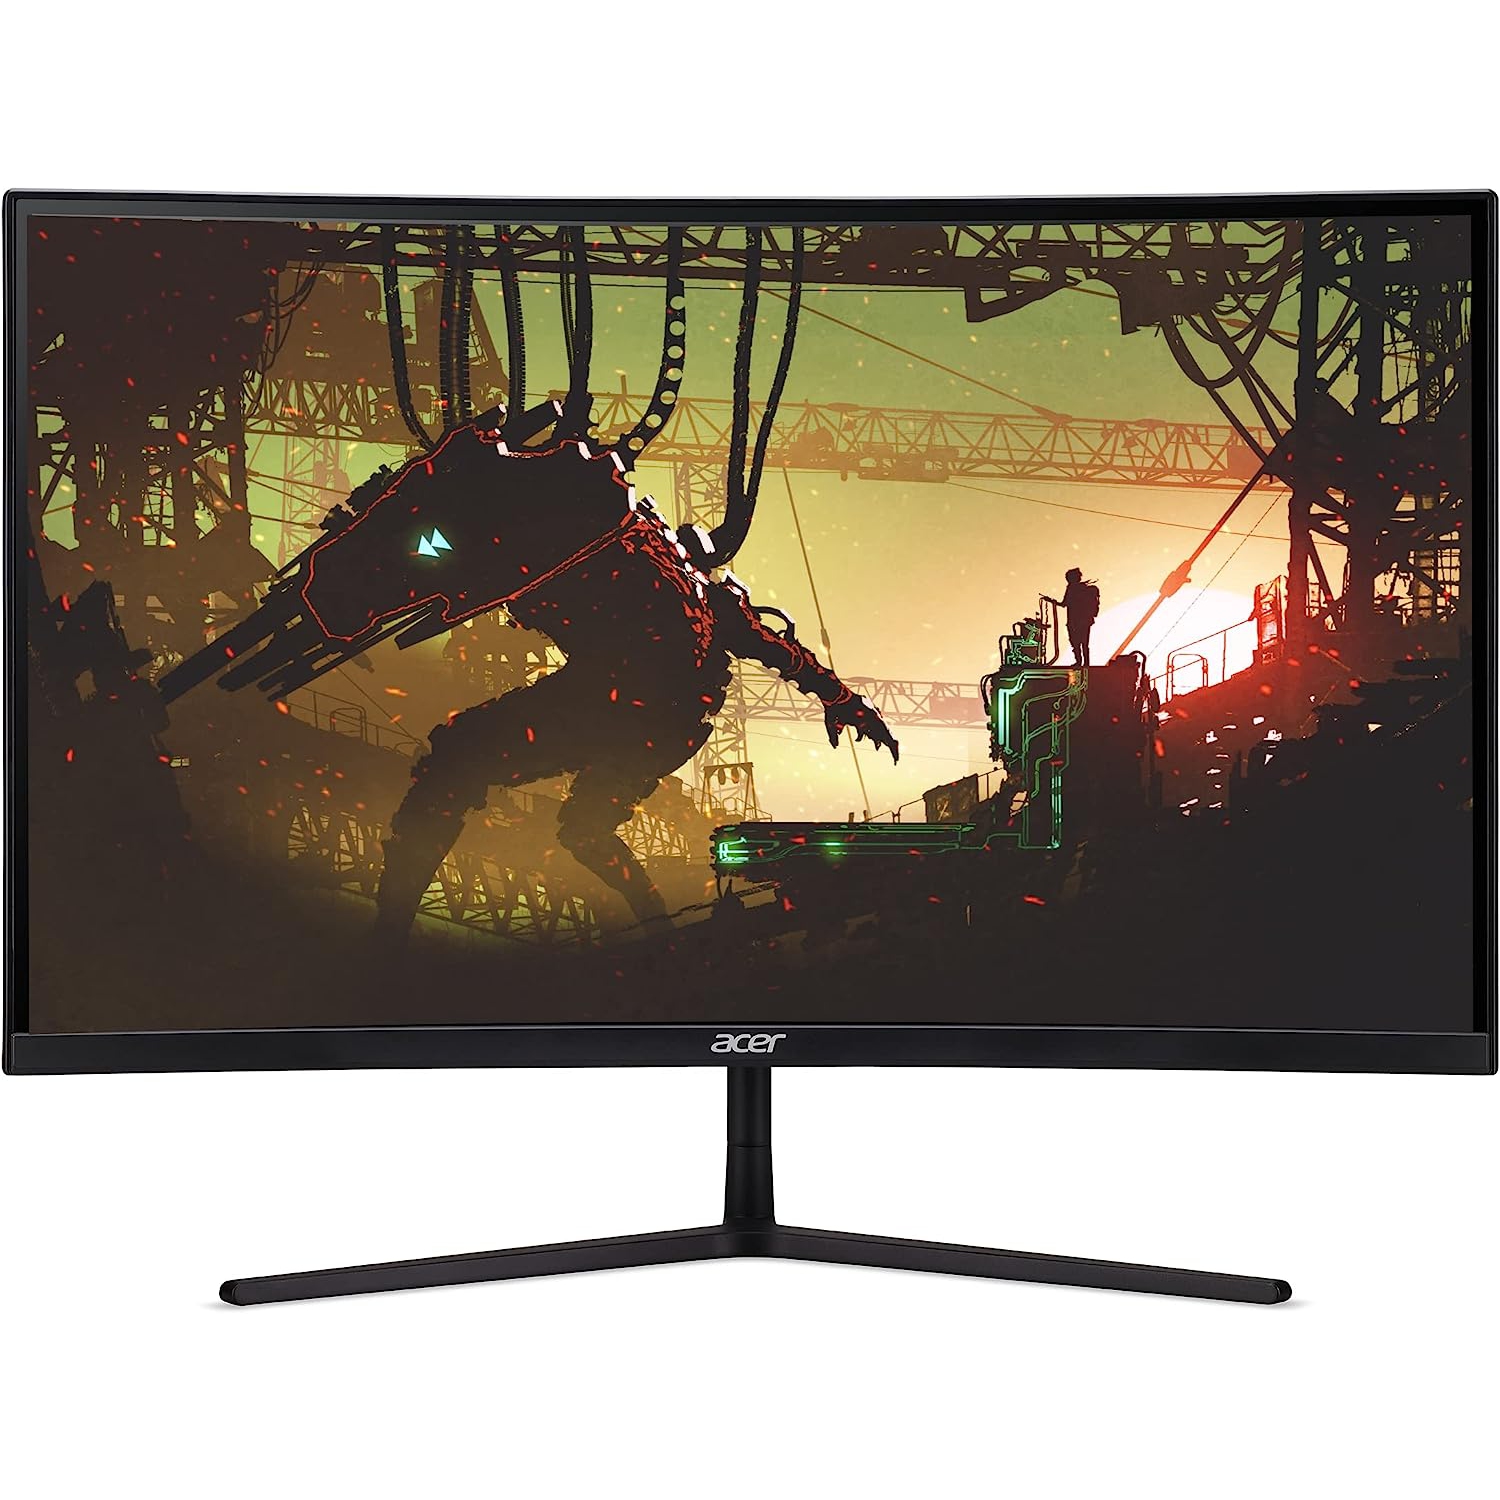 Acer 31.5" WQHD 2560x1440 Curved 1ms VRB 165Hz AMD FreeSync Premium Pro Gaming Monitor - Refurbished (Excellent) w/ 2 Years Warranty